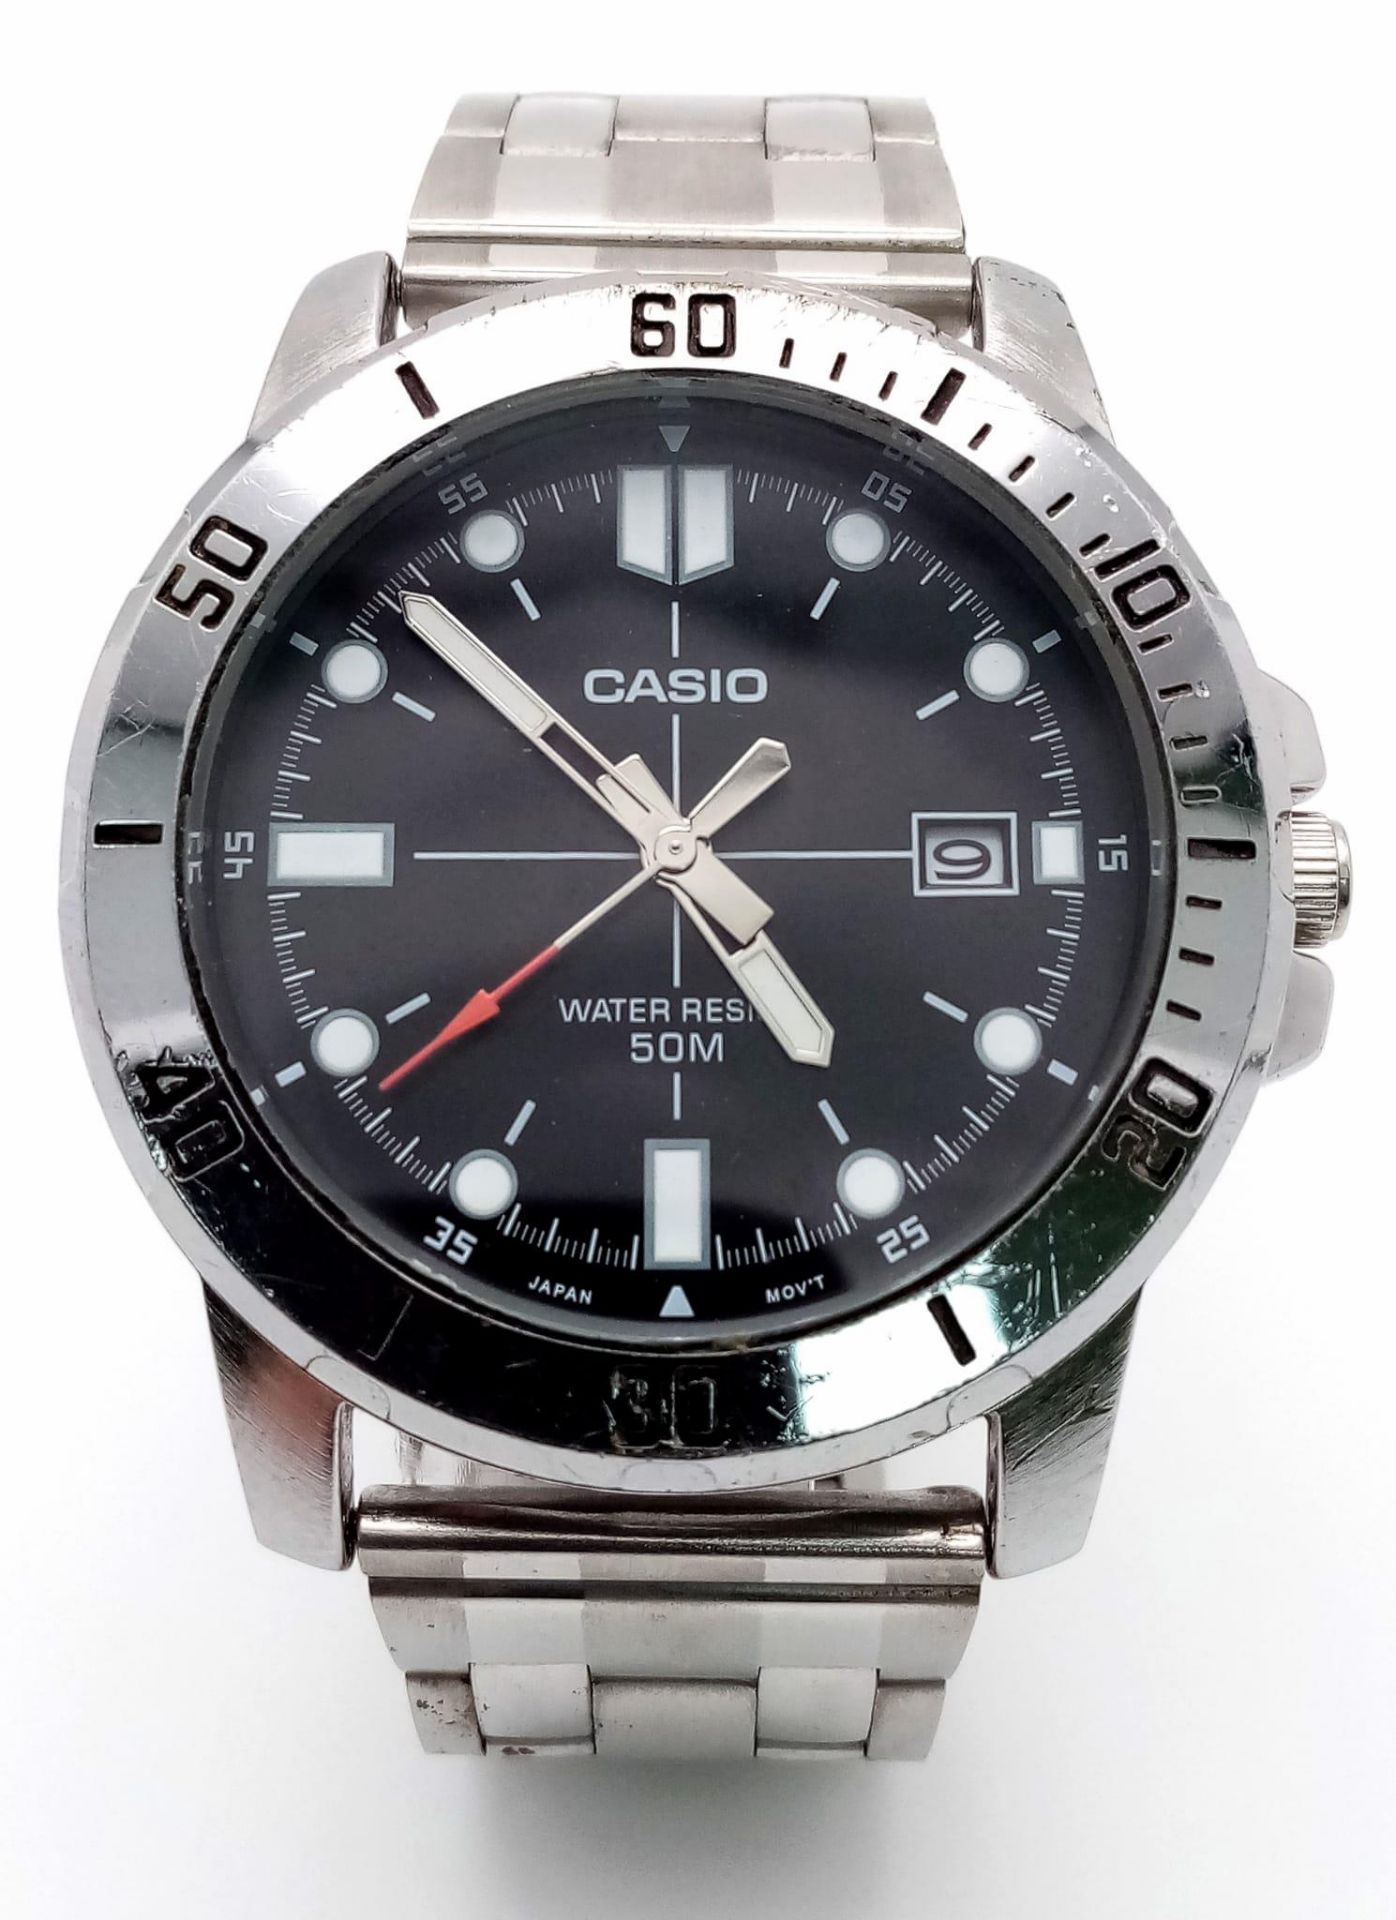 A Casio Quartz Gents Watch. Stainless steel bracelet and case - 44mm. Black dial with date window.